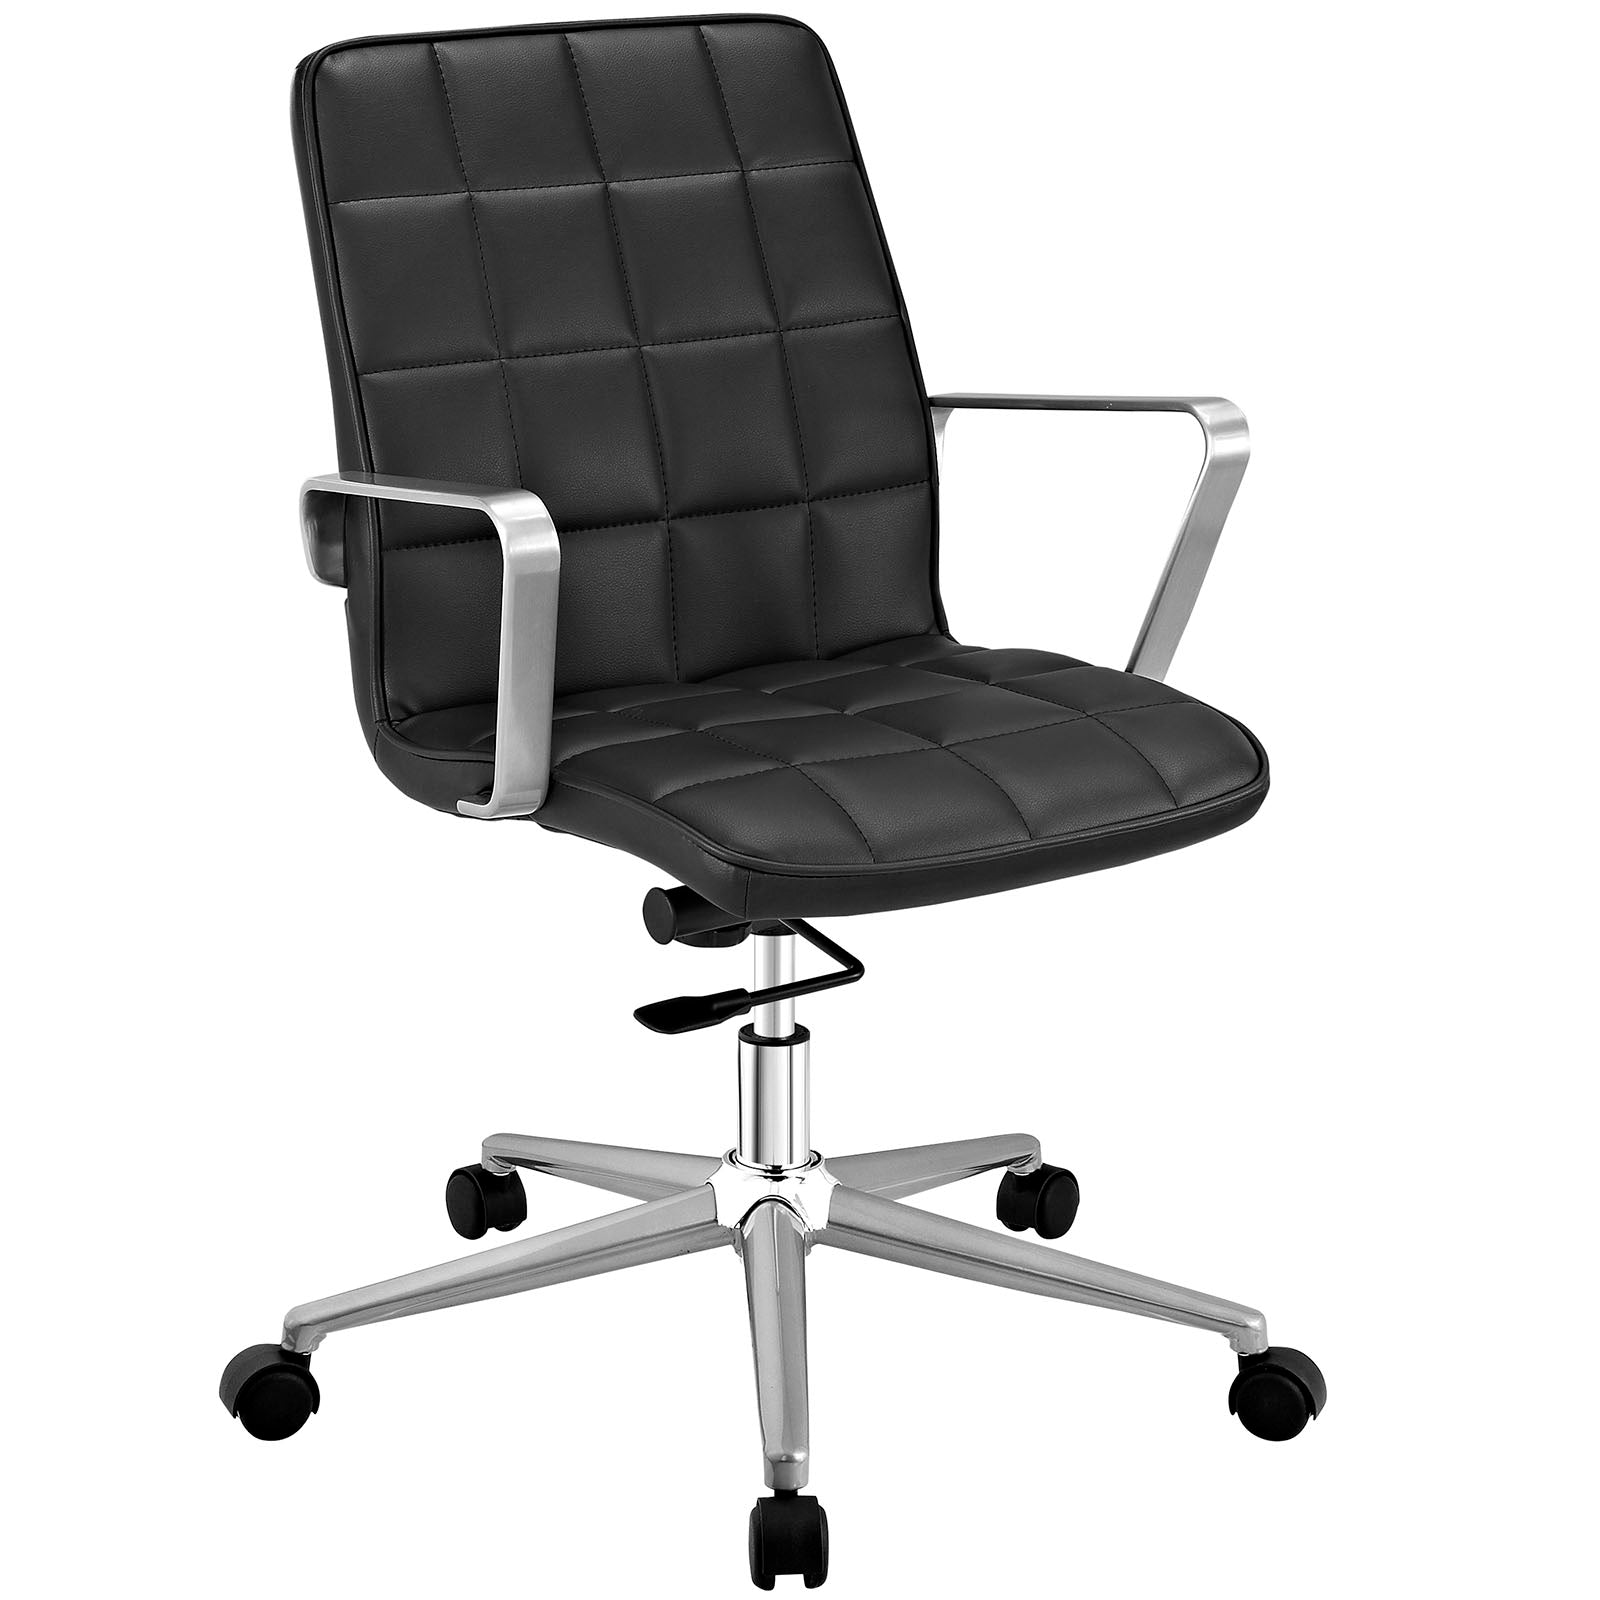 BUILDMyplace Office Furniture: Tile Office Chair